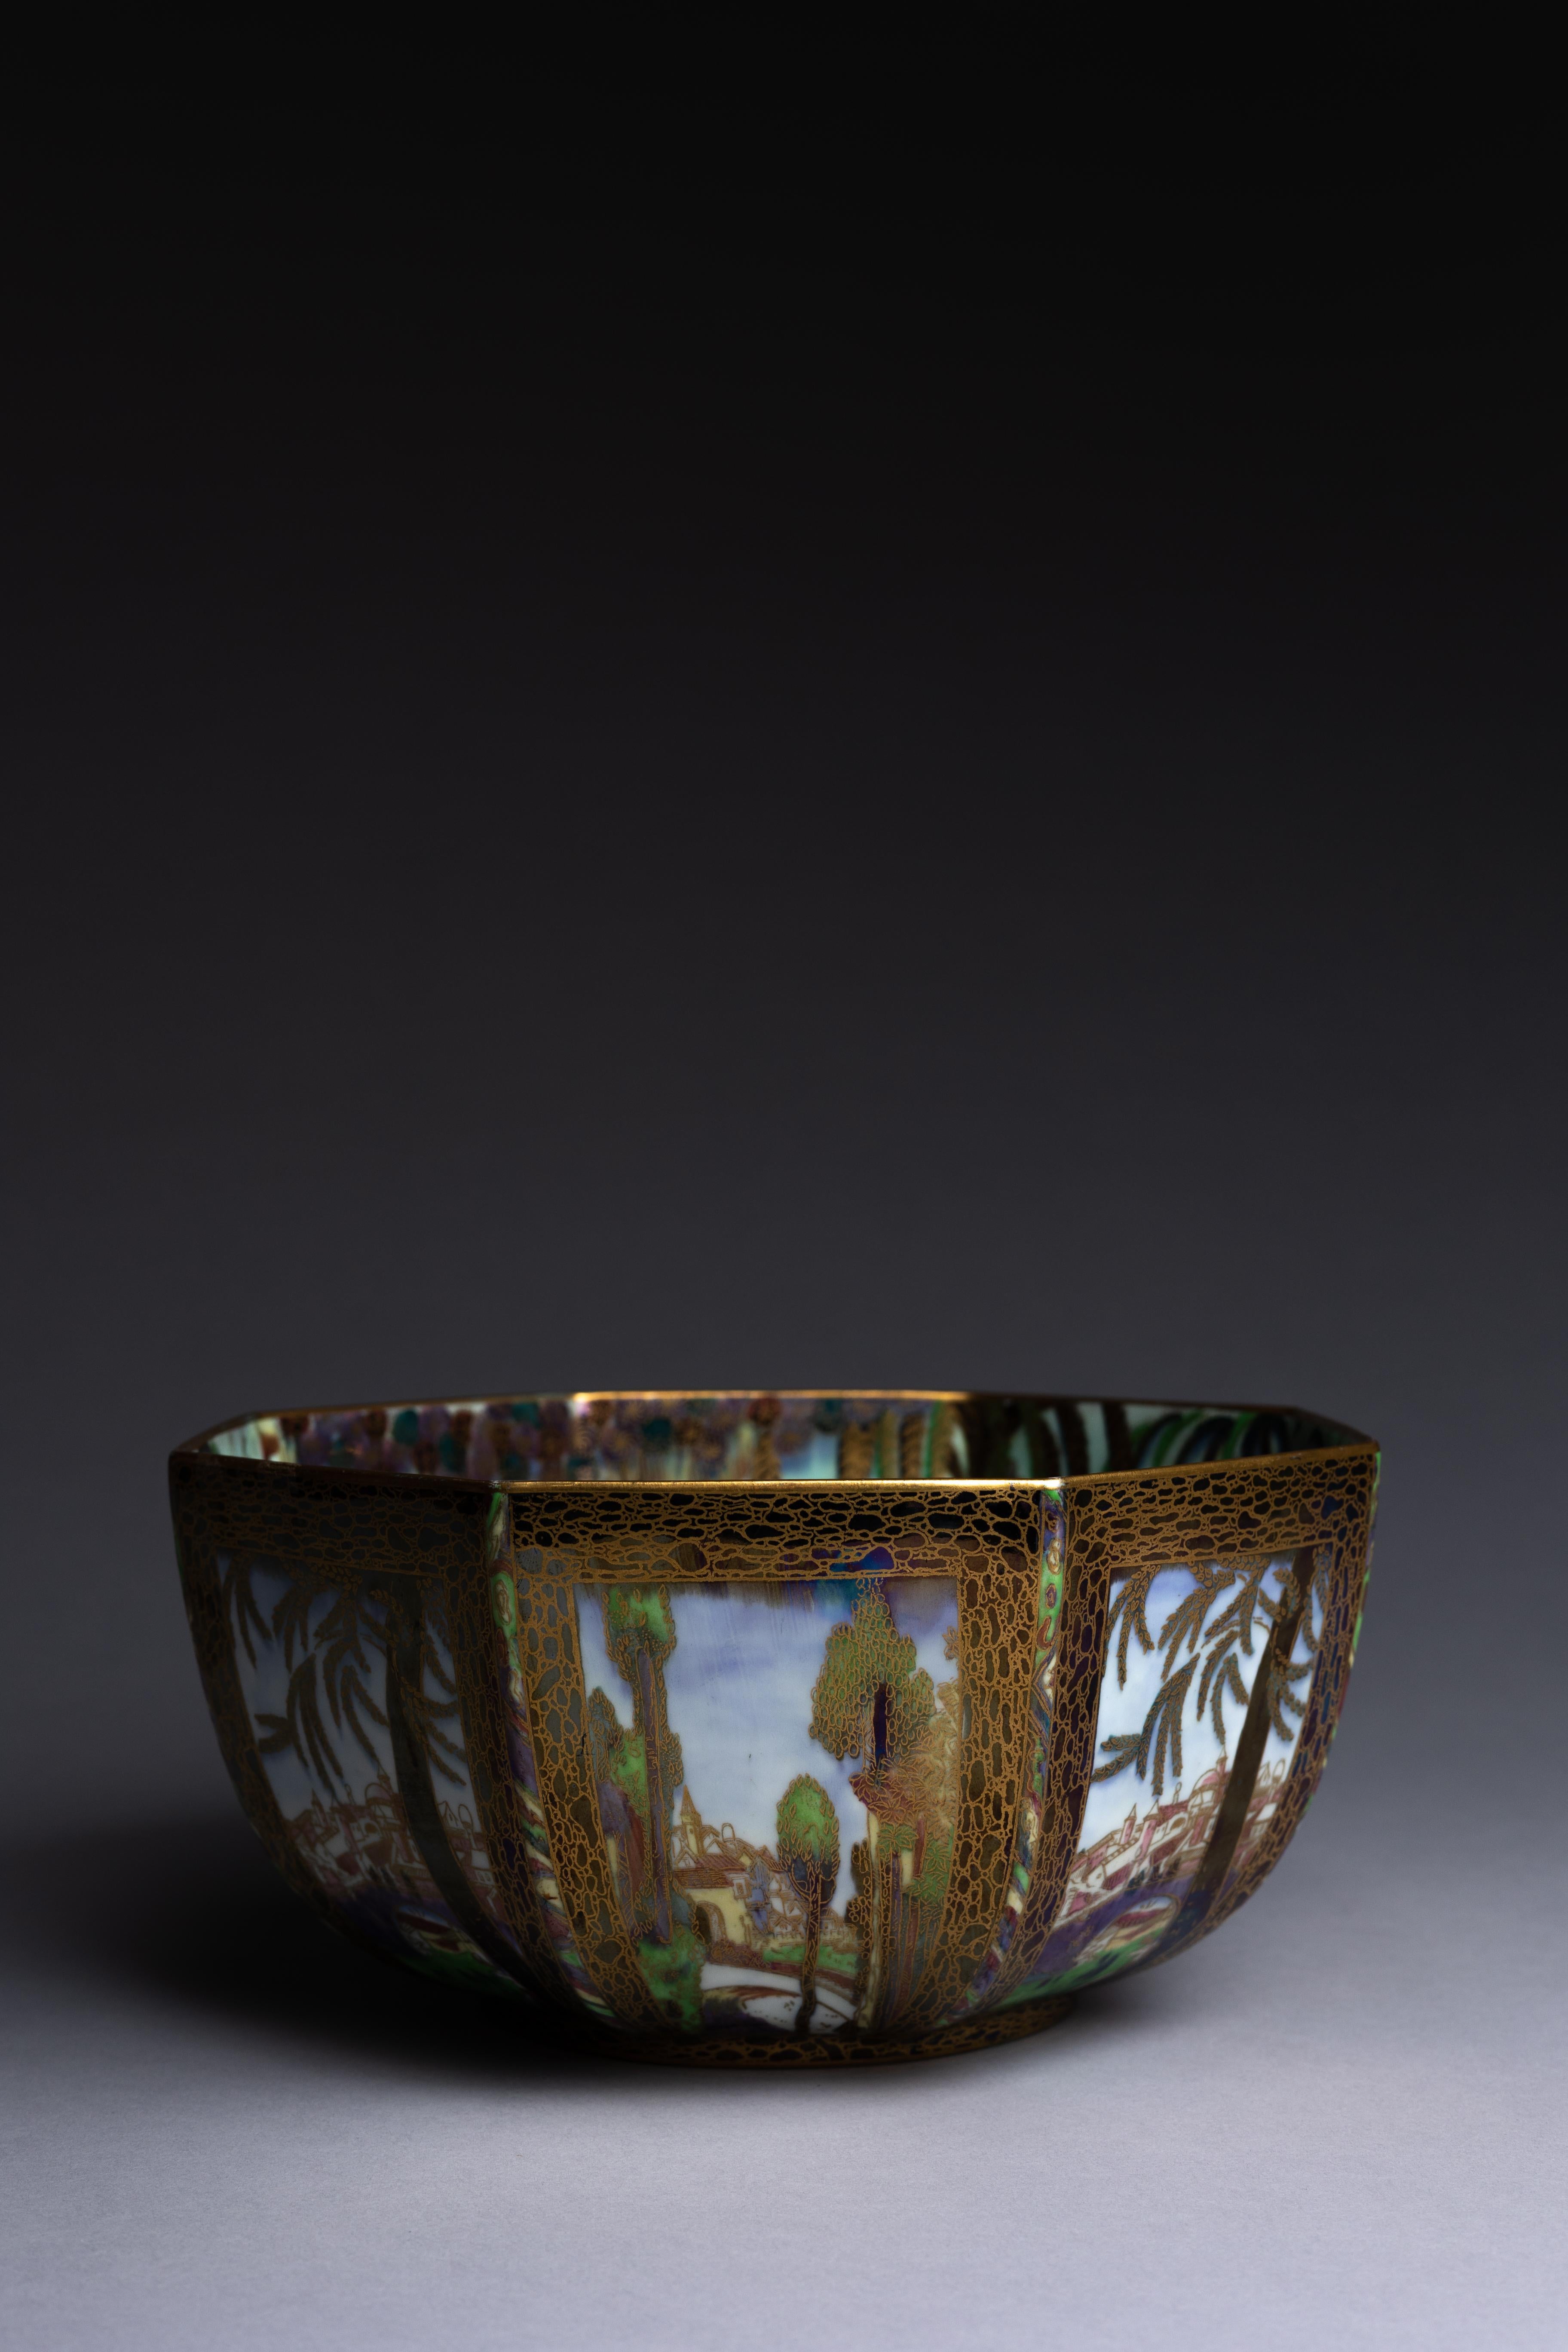 A Wedgwood Fairyland lustre bowl designed by Daisy Makeig-Jones ca. 1920 and decorated with the 'Castle on a Road' pattern on the exterior and the 'Fairy in a Cage' pattern on the interior.

Daisy Makeig-Jones is best known for the Fairyland